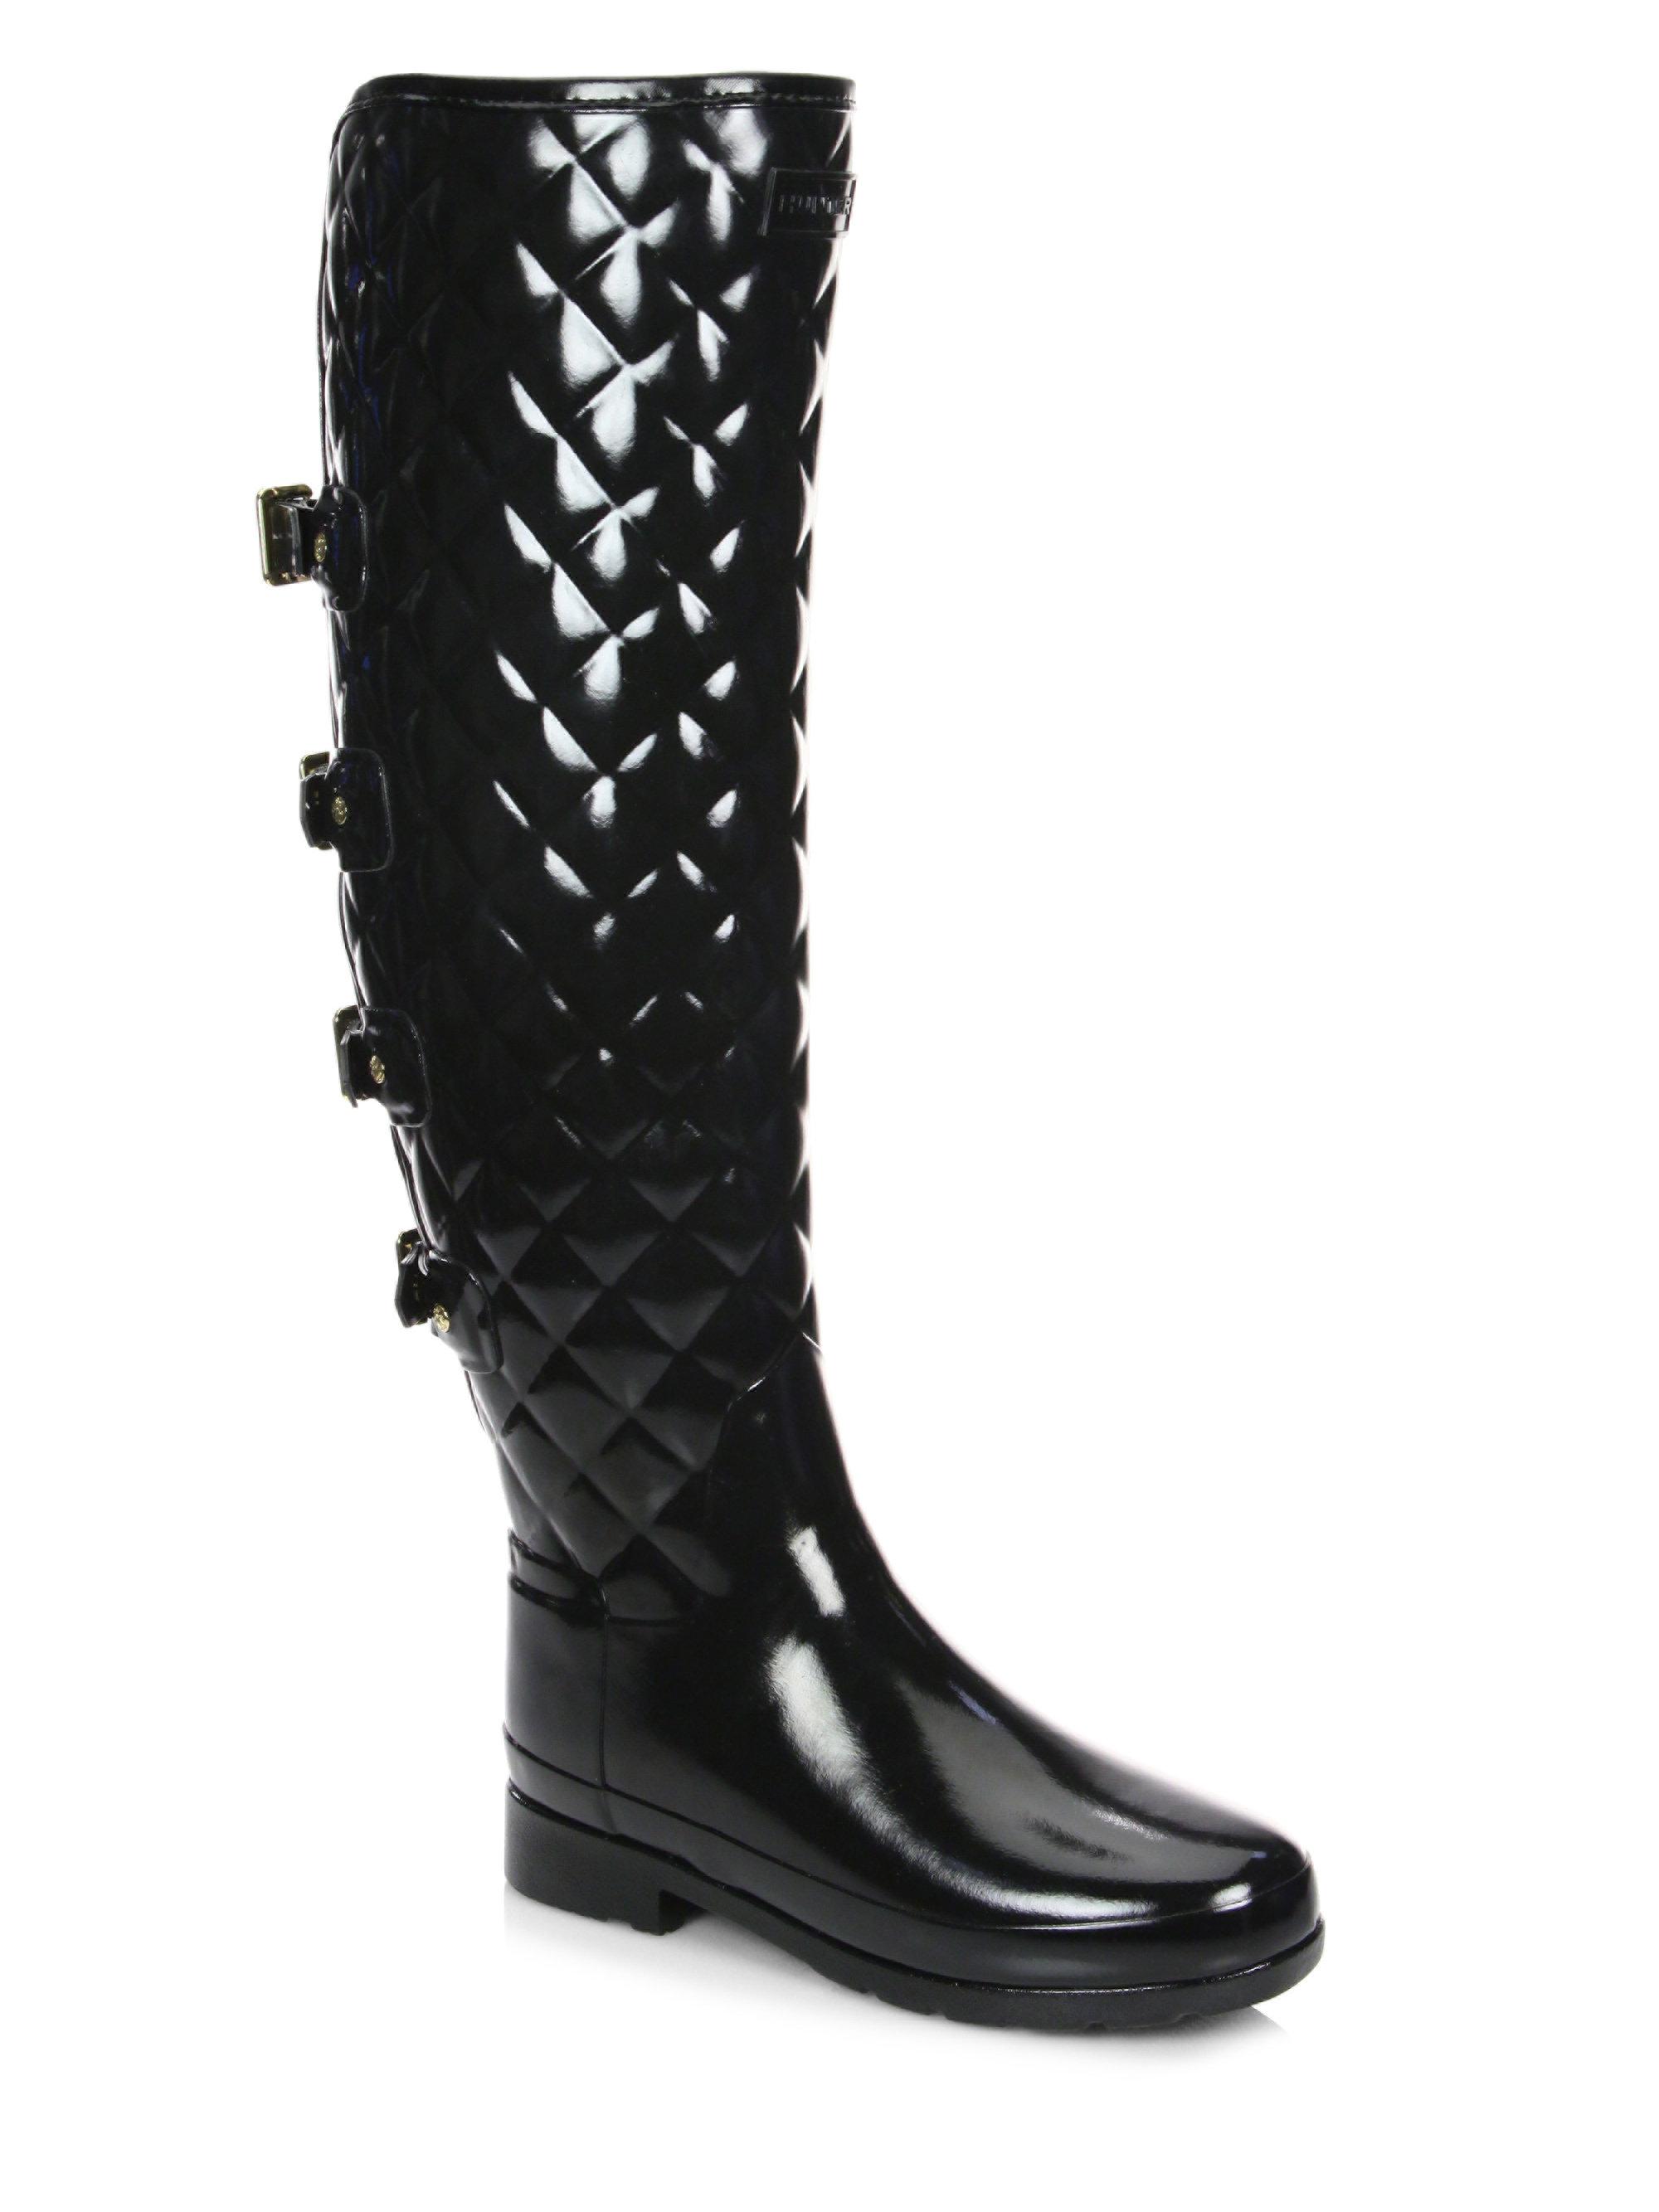 HUNTER Rubber Refined Quilted Over-the-knee Rain Boots in Black - Lyst